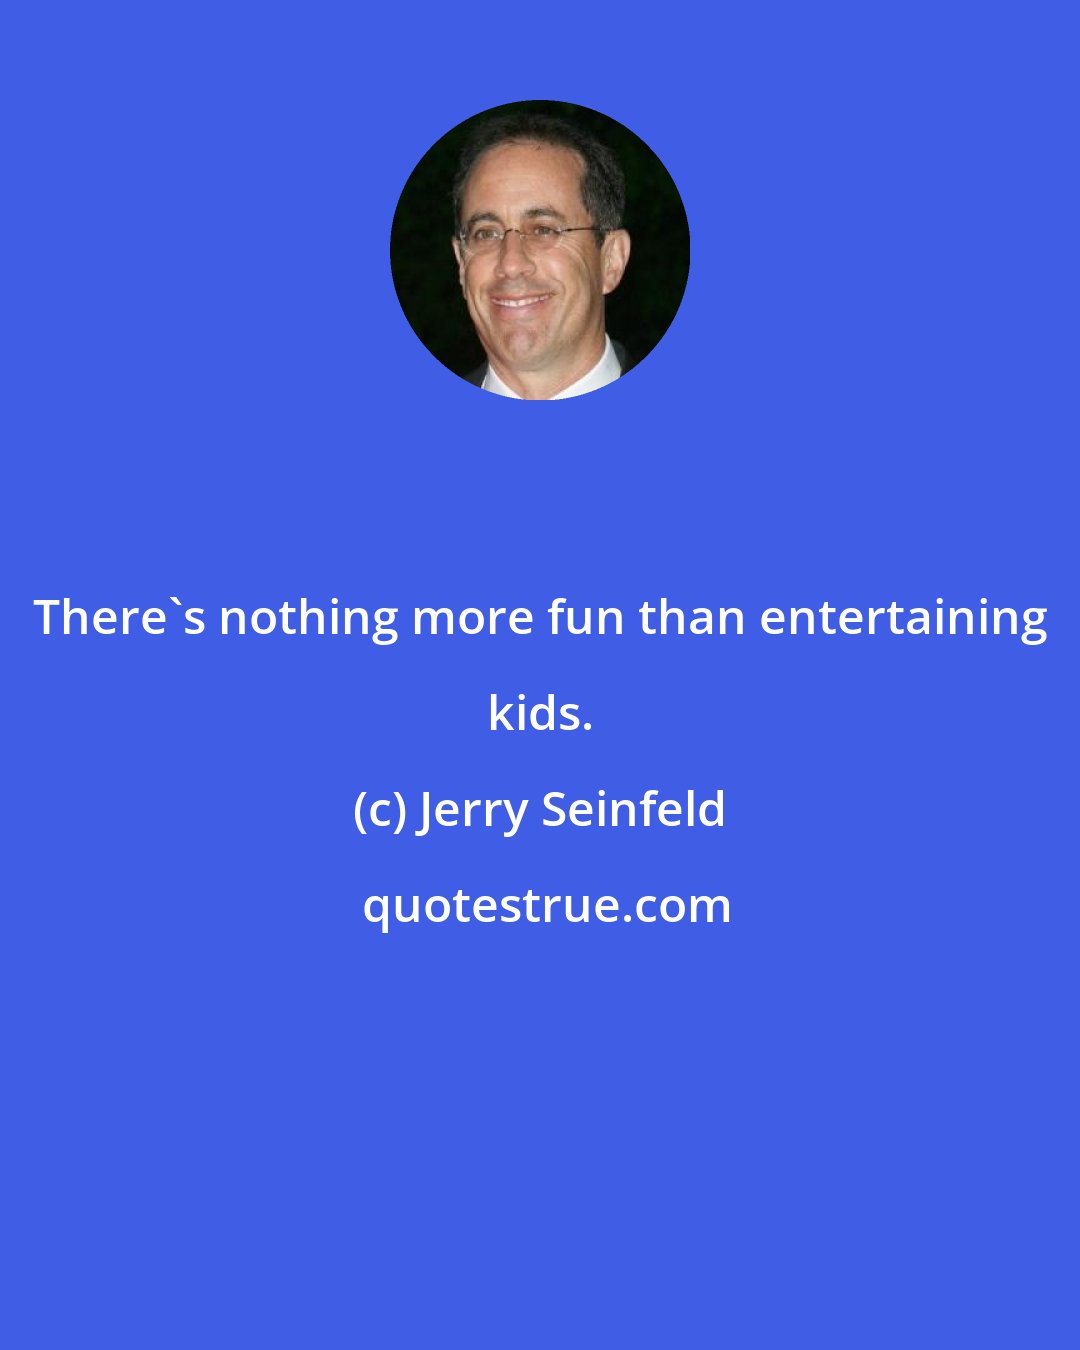 Jerry Seinfeld: There's nothing more fun than entertaining kids.